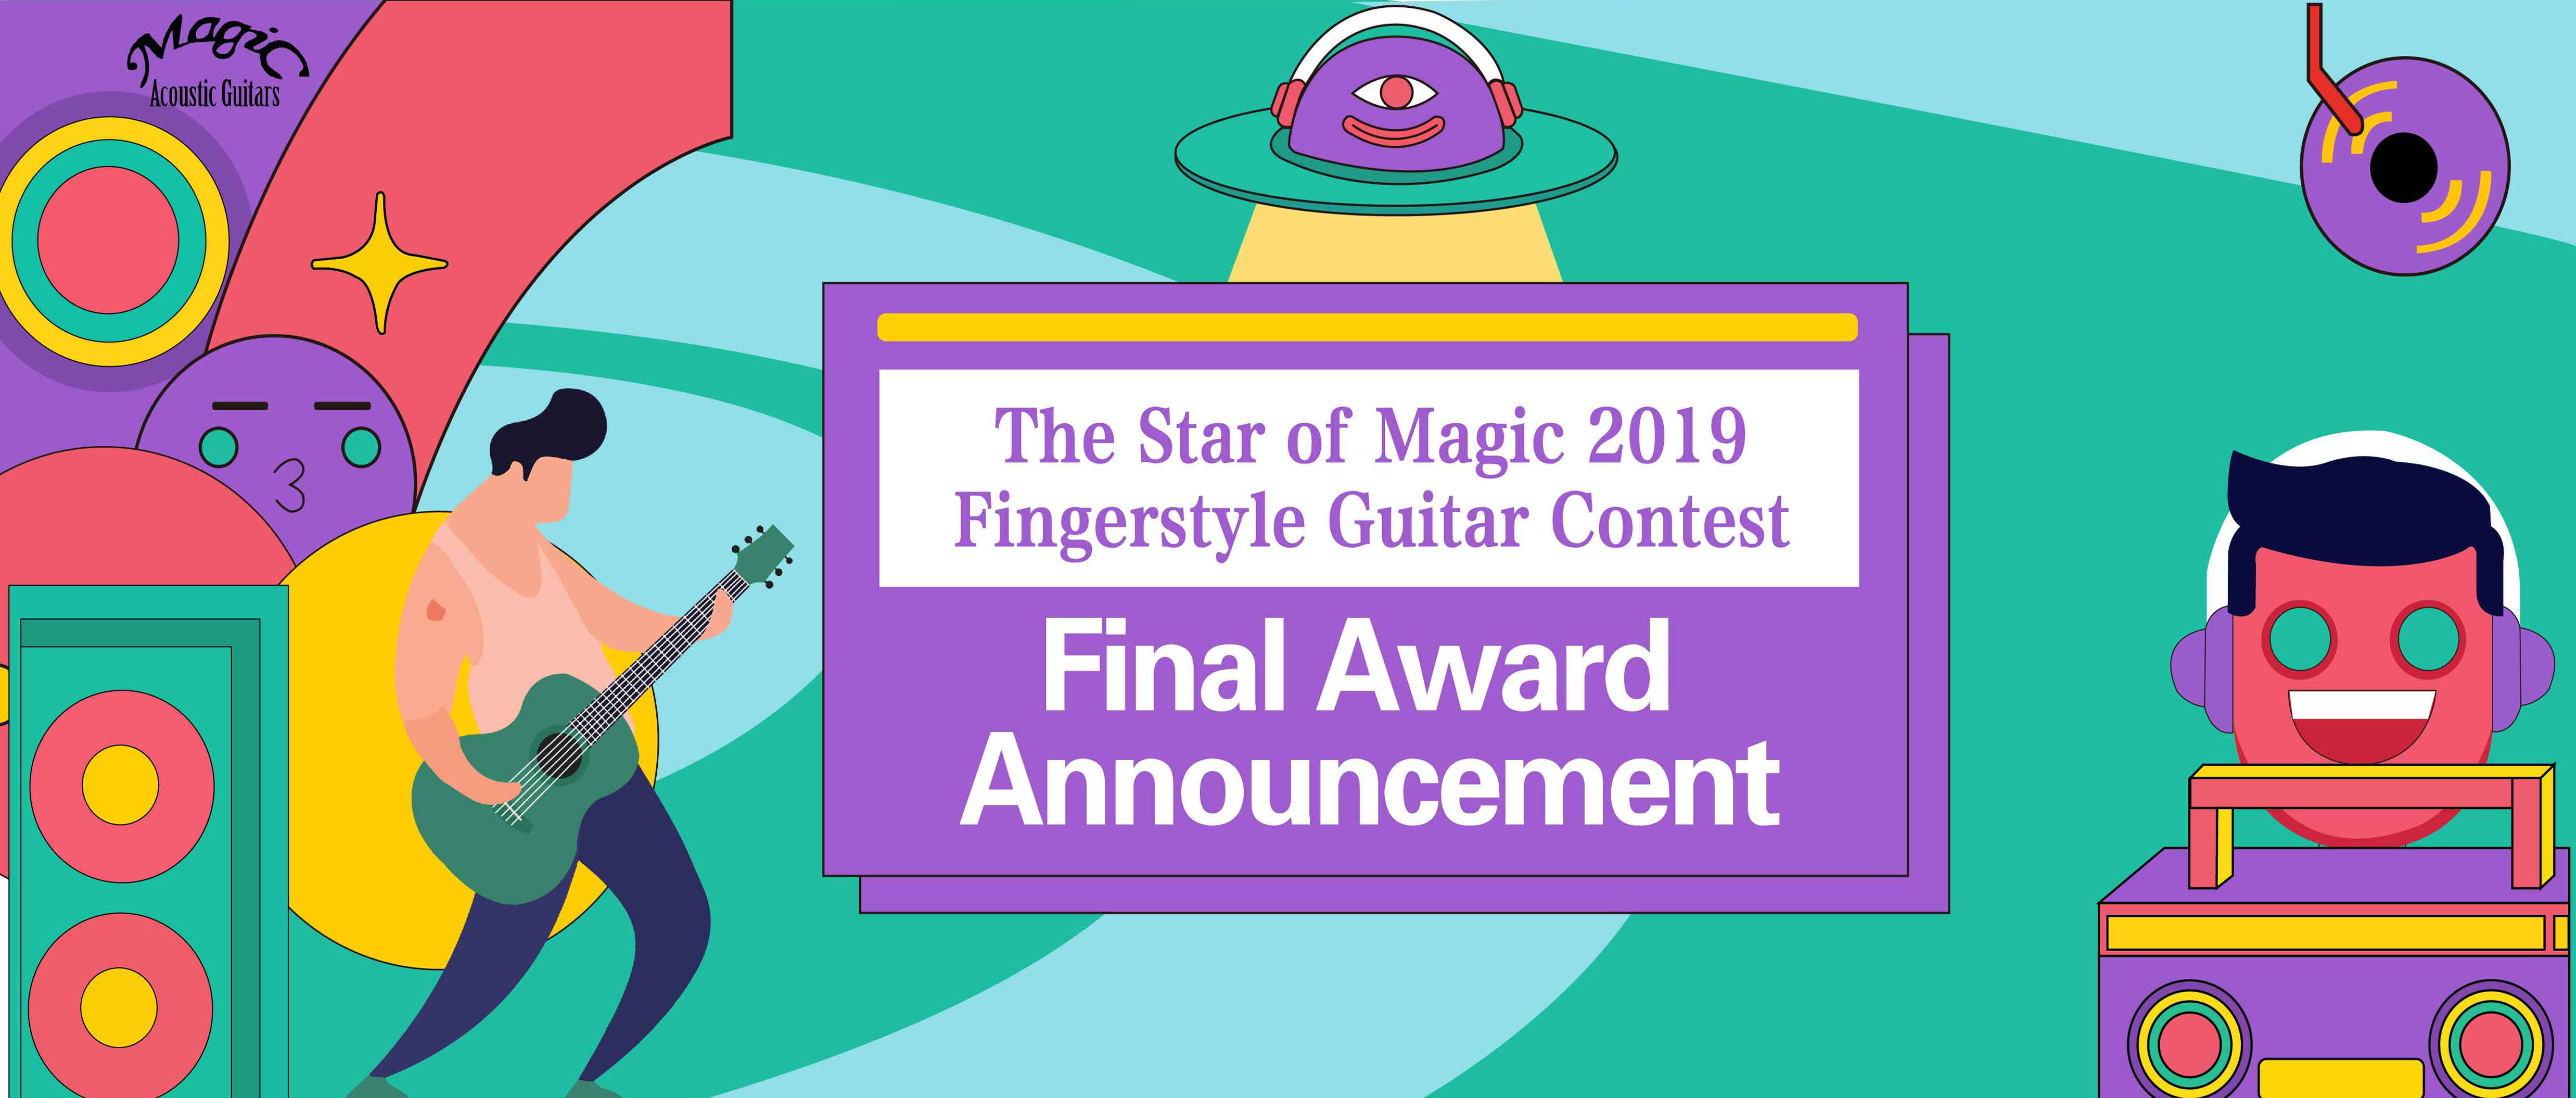 The Star of Magic 2019 Fingerstyle Guitar Contest final awards announcement